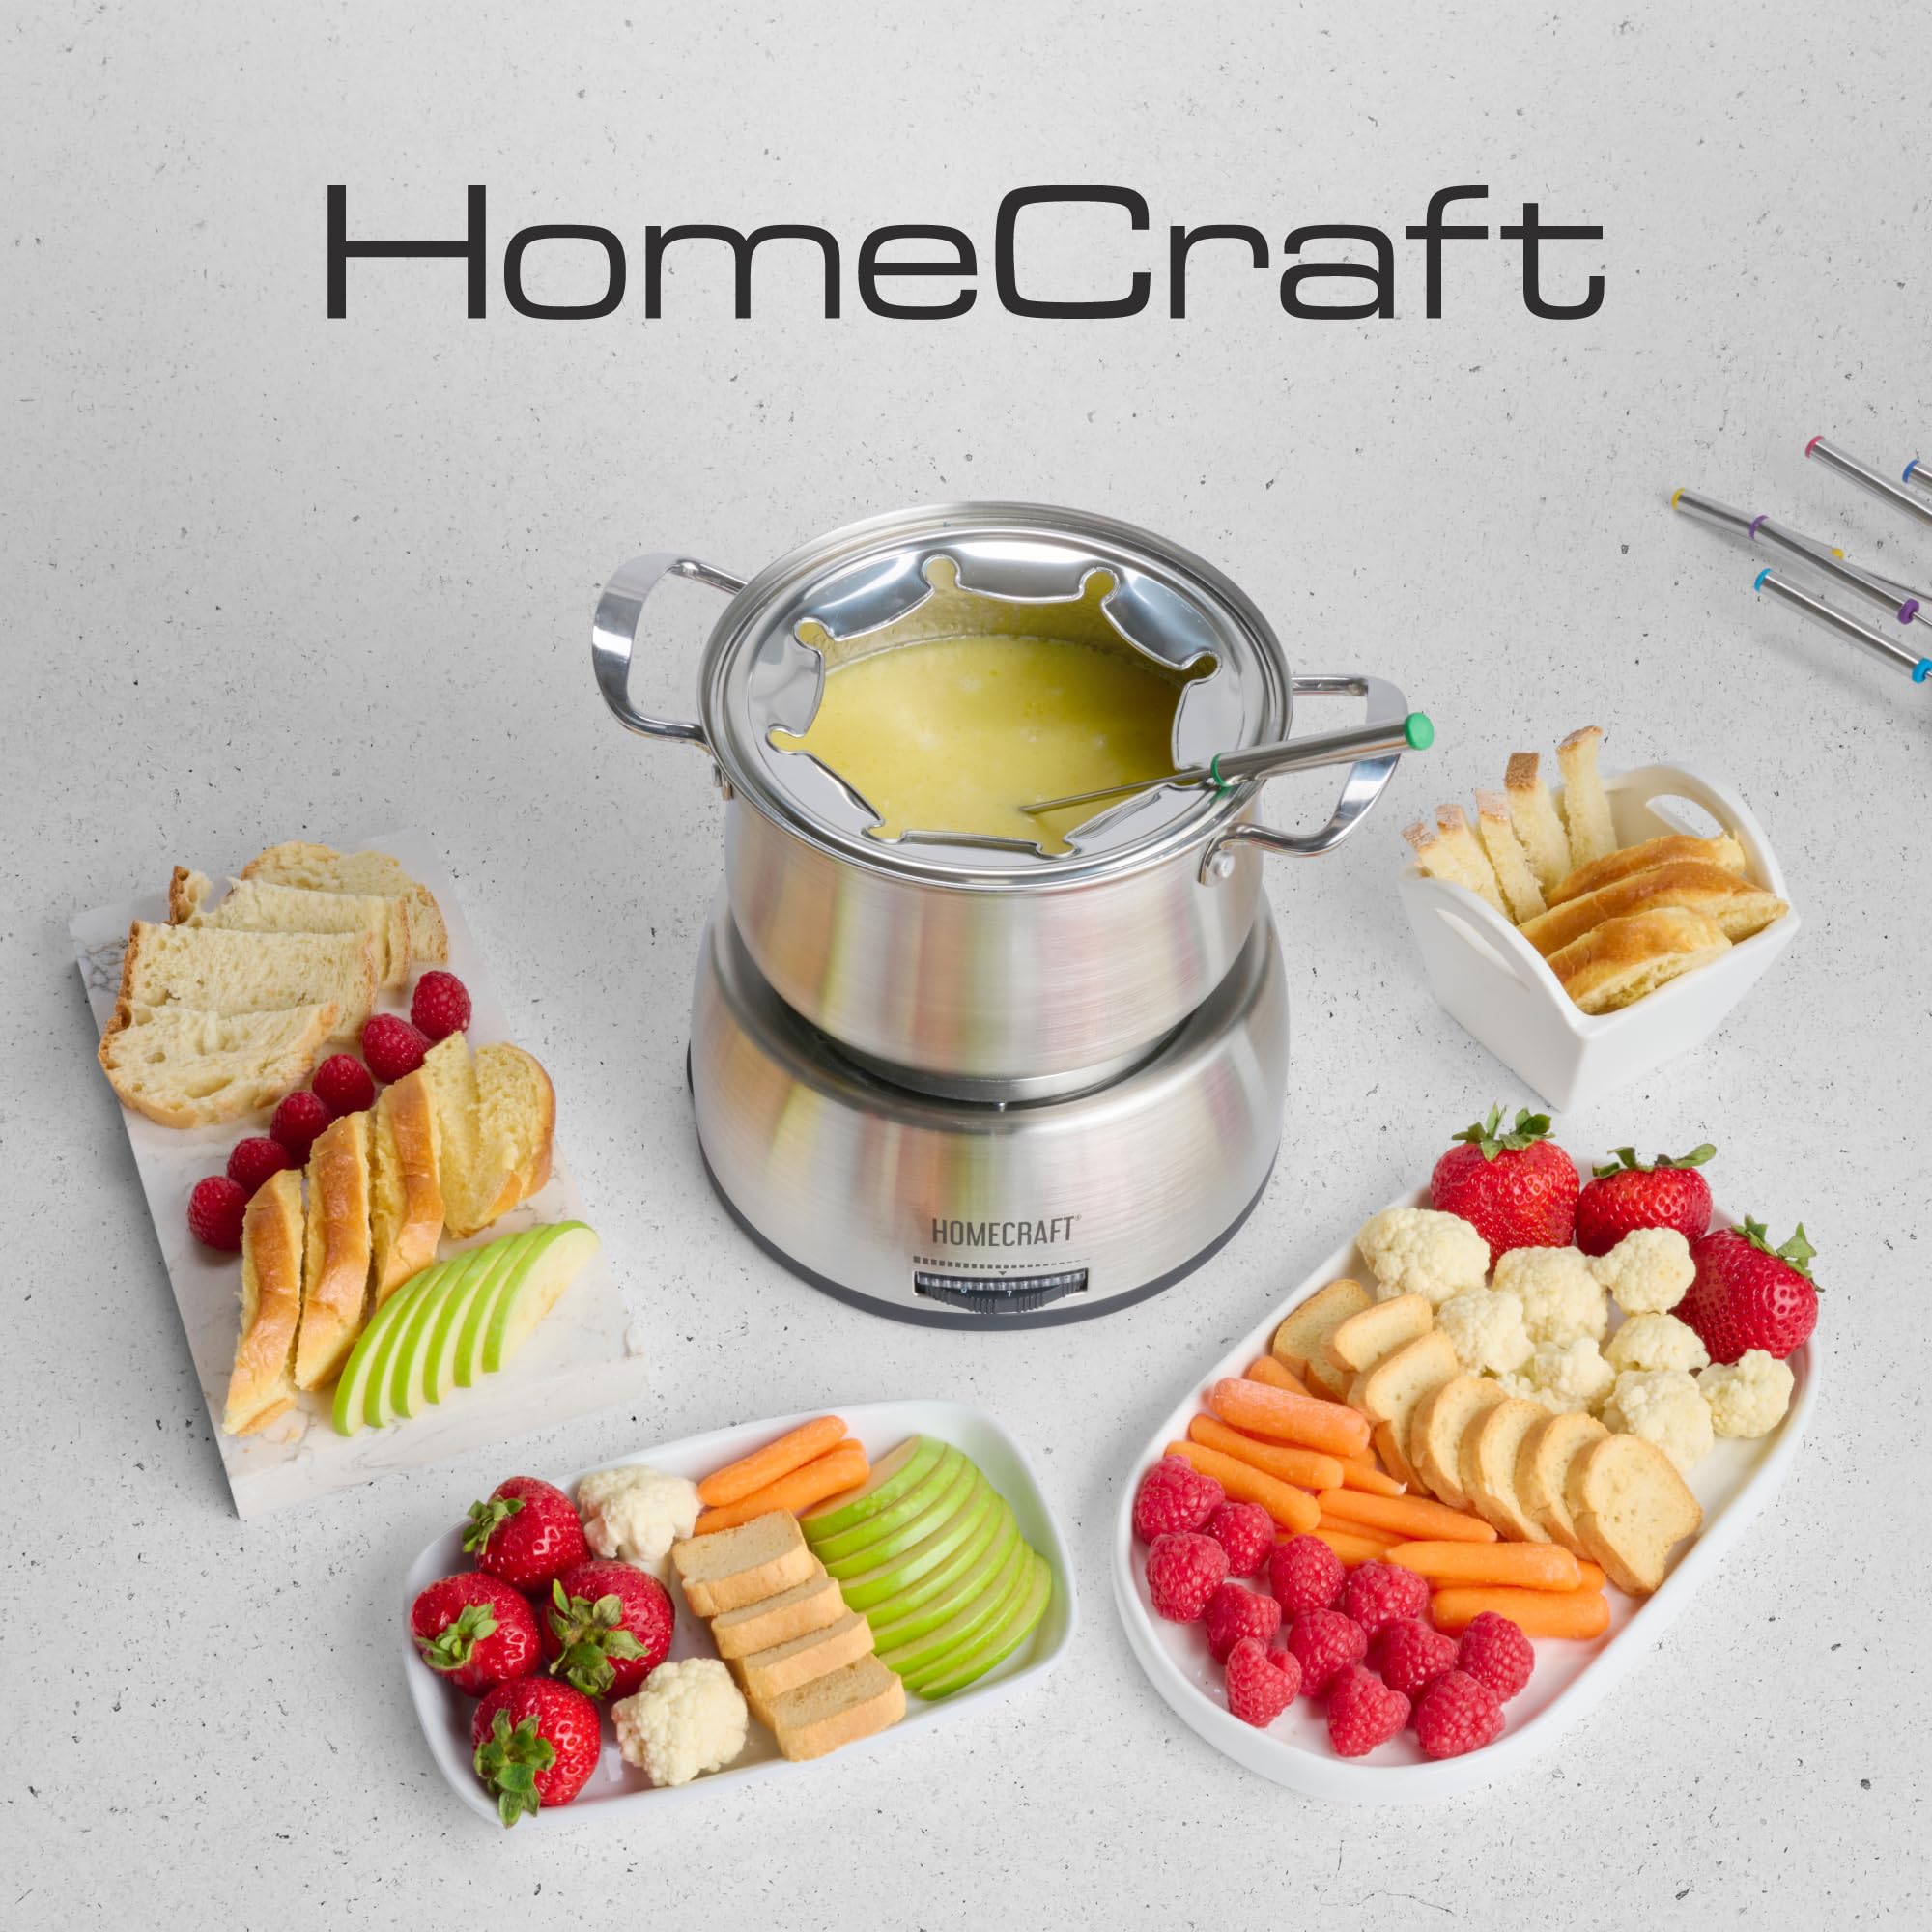 Nostalgia 8-Cup Electric Fondue Pot Set for Cheese & Chocolate - 8 Color-Coded Forks, Adjustable Temperature Control - Stylish Serving for Hors d'Oeuvres, Entrees, and Desserts - Stainless Steel